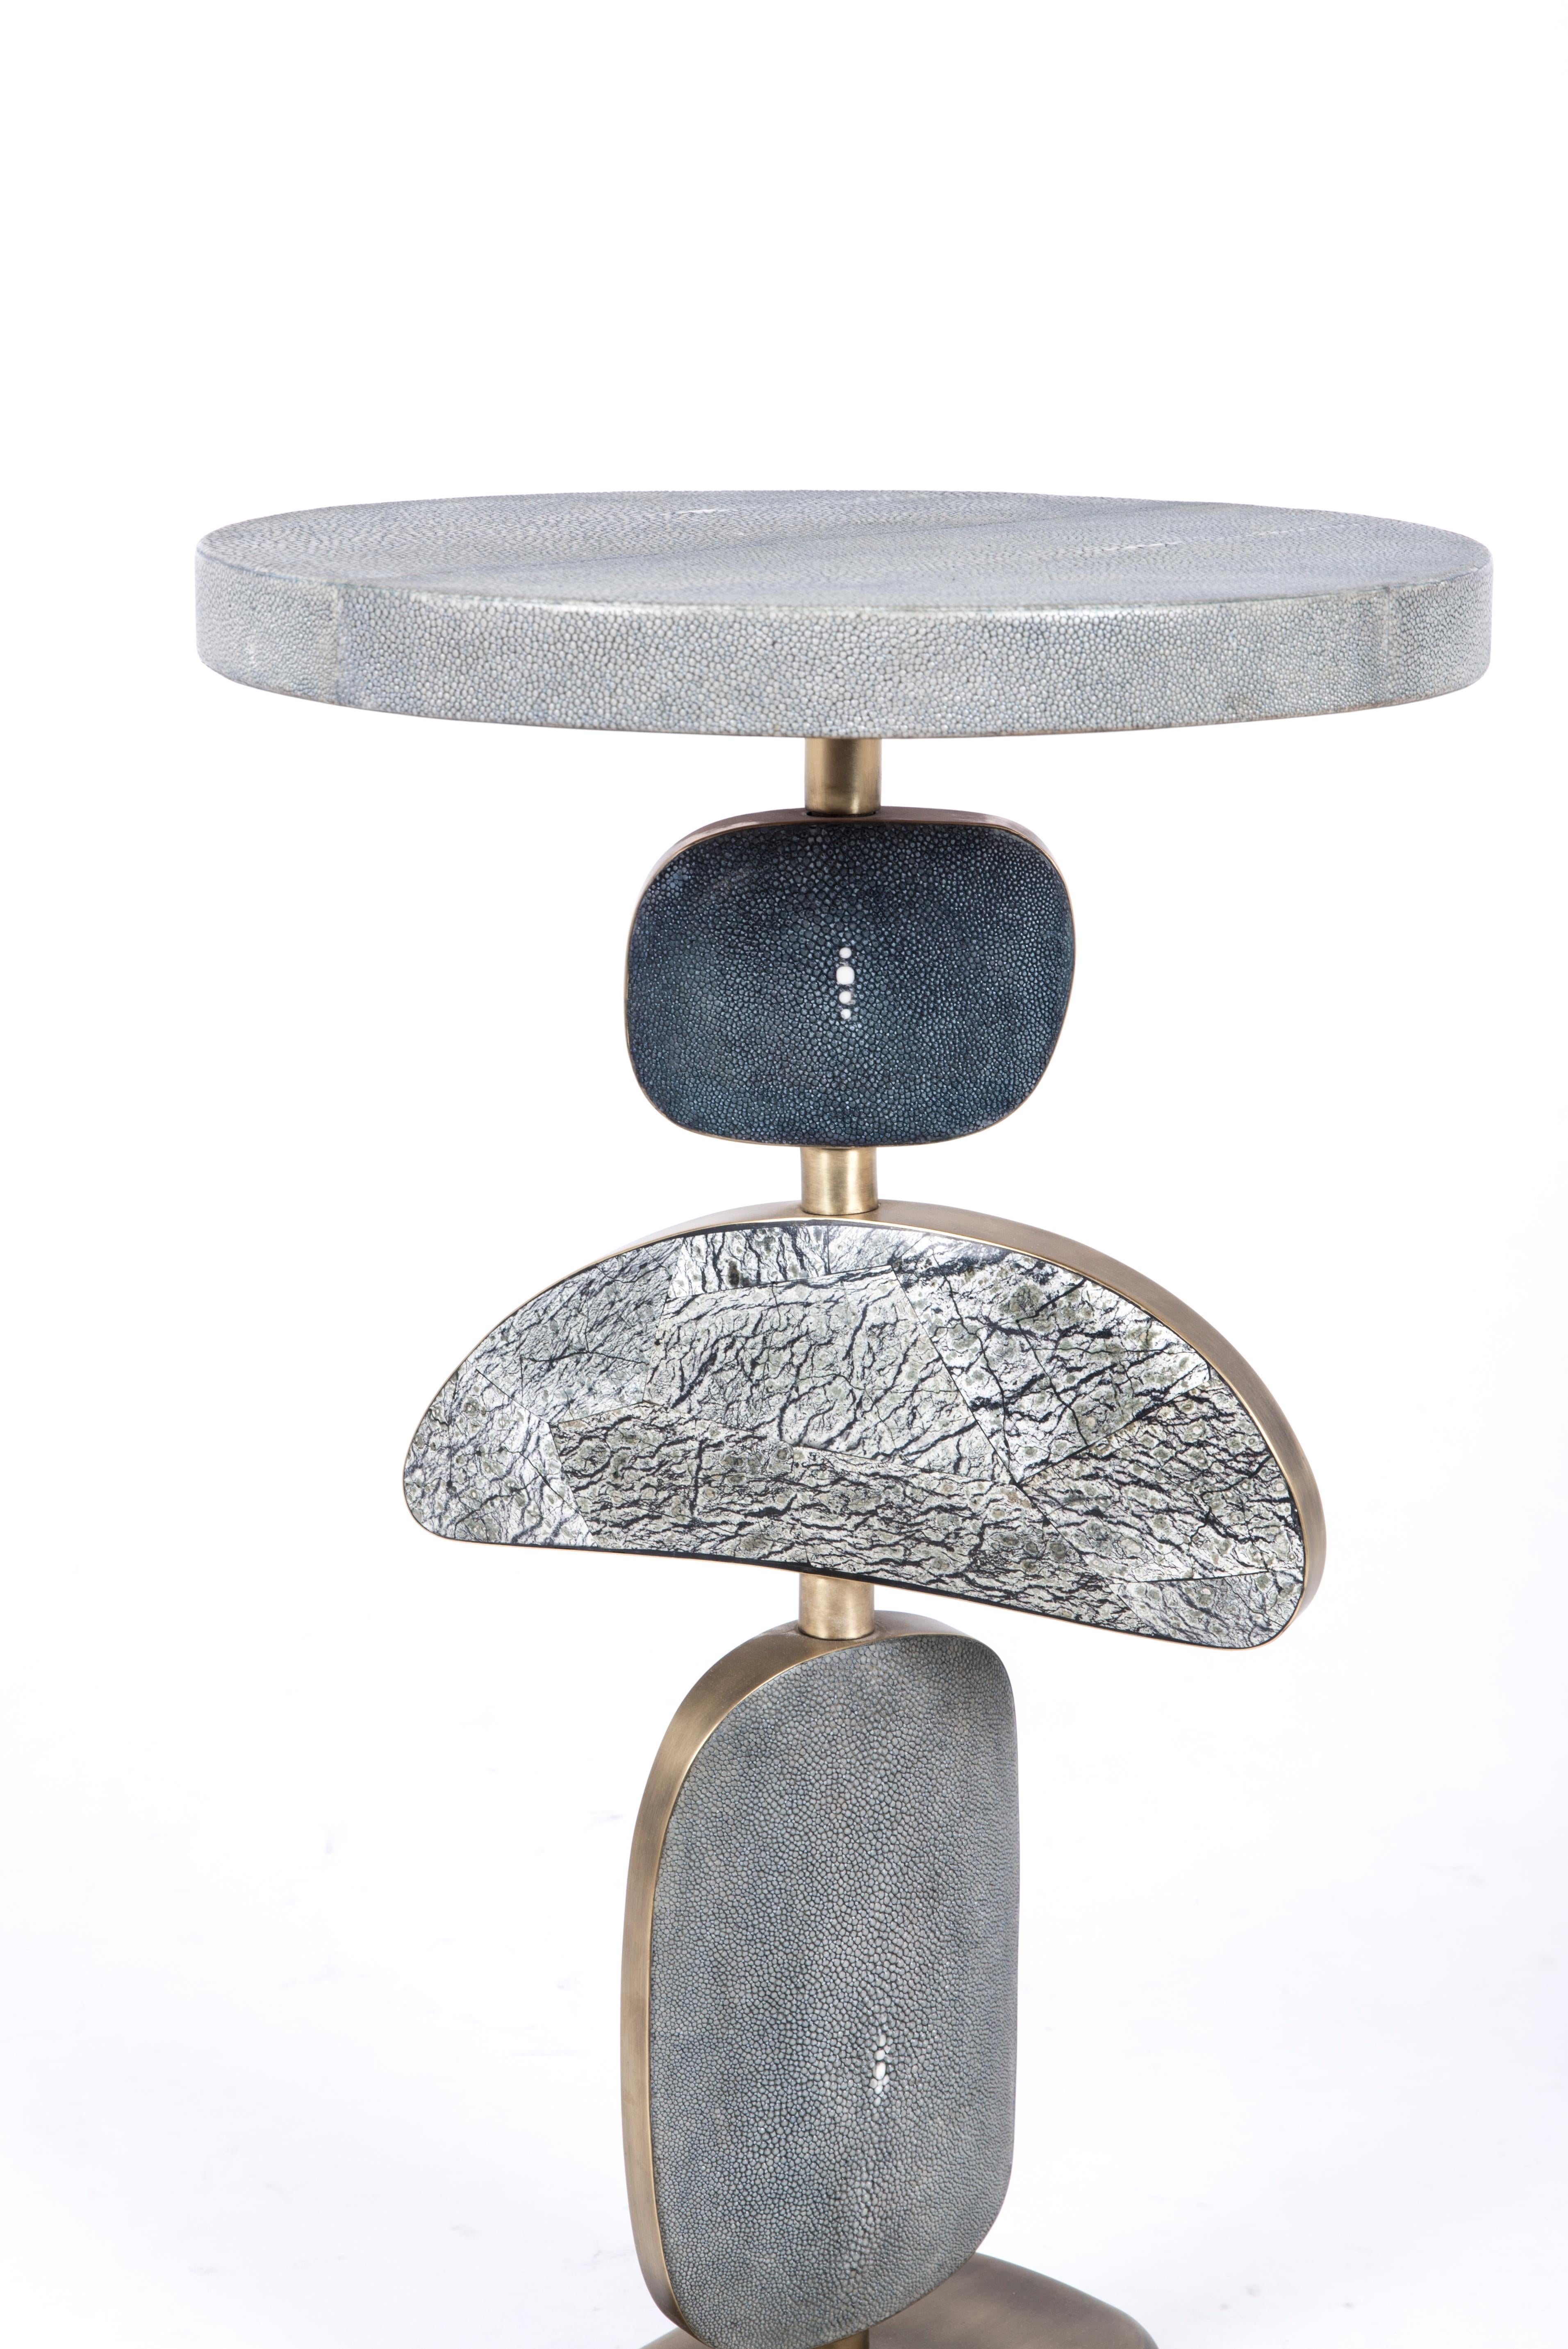 Art Deco Shagreen Side Table with Mobile Sculptural Parts and Brass Accents by Kifu Paris